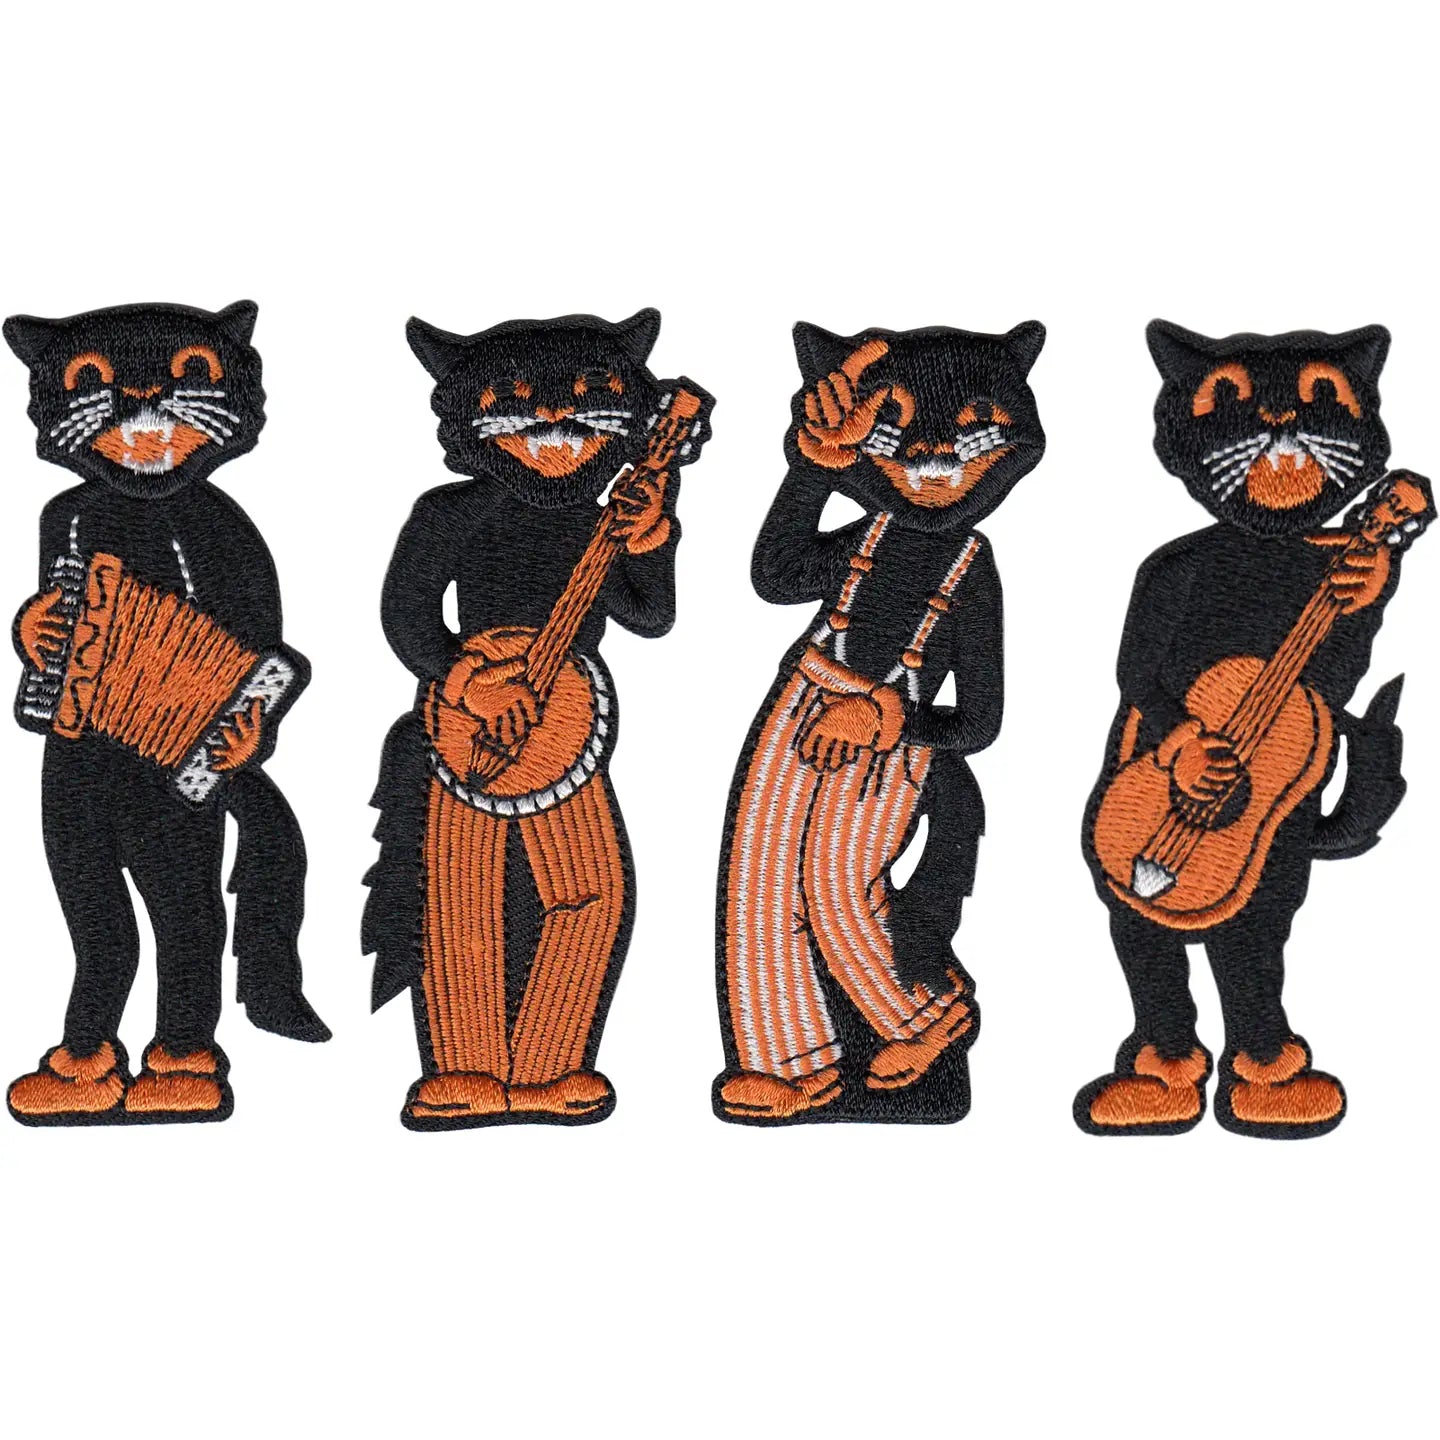 VINTAGE BLACK CATS PATCHES ASSORTED